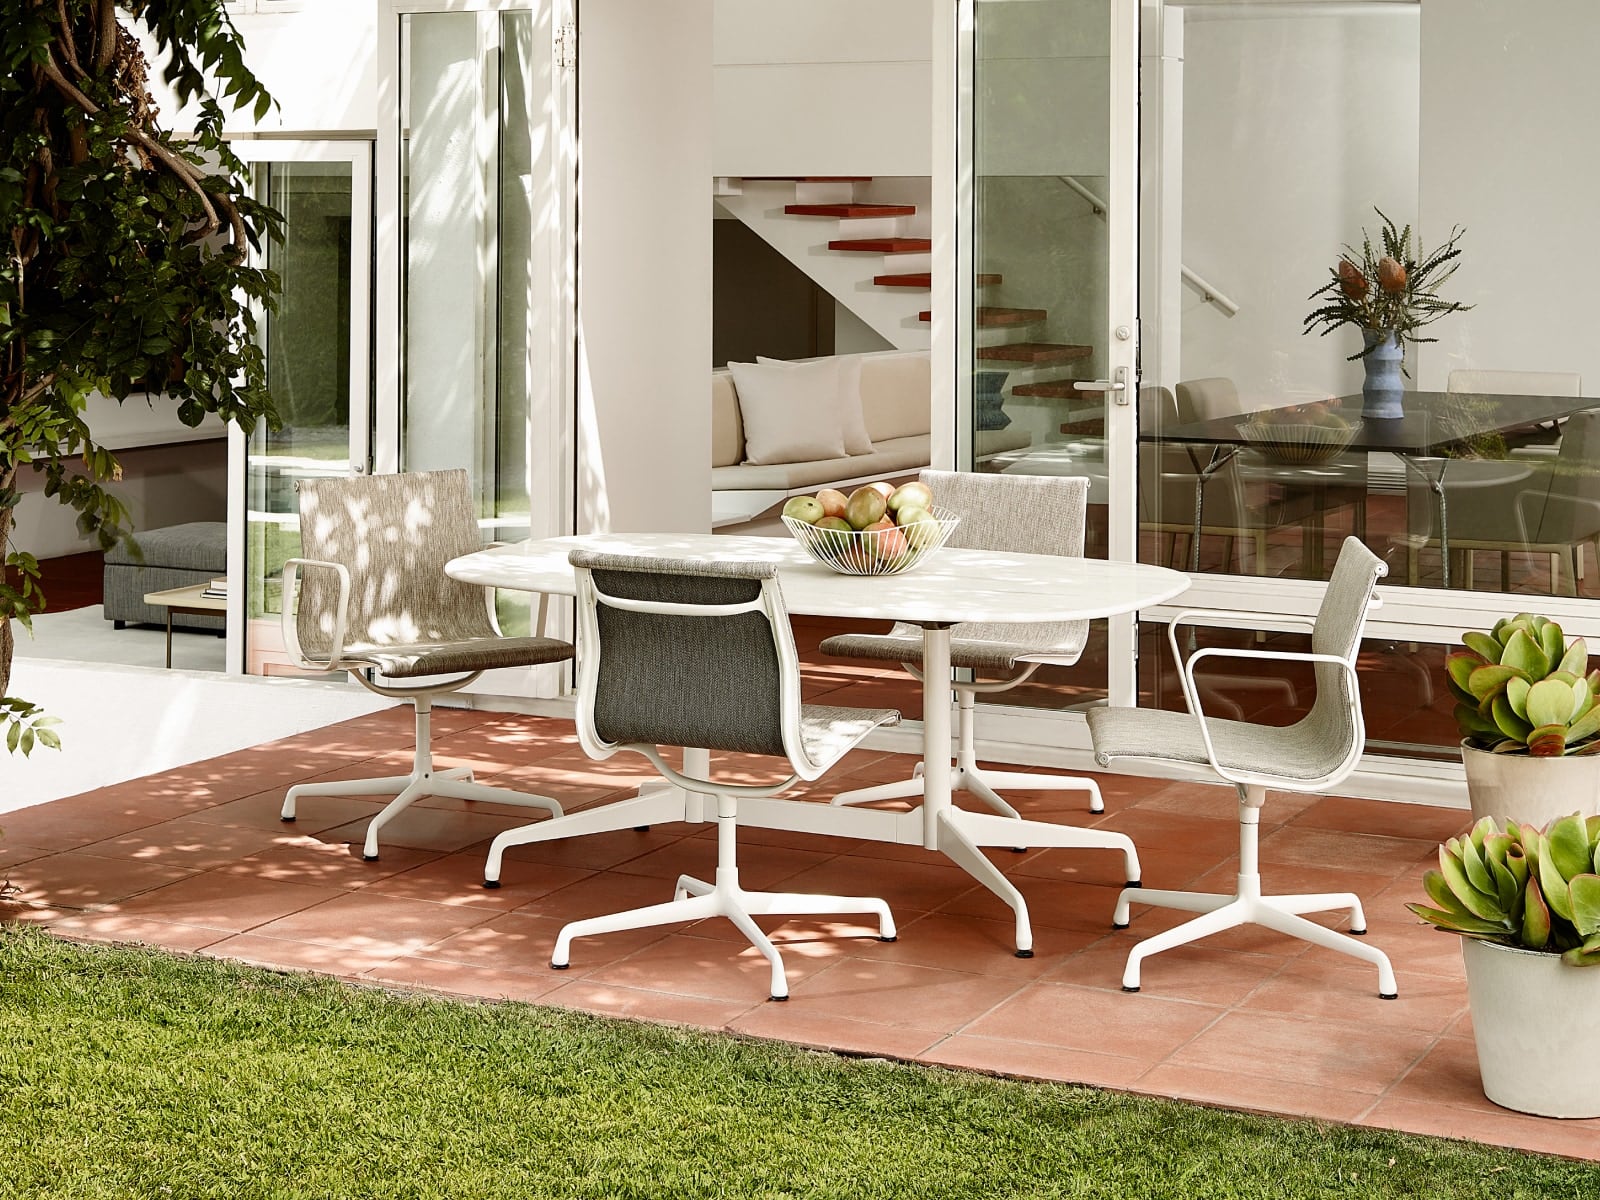 Four Eames Aluminum Group Side Chairs-Outdoor surround an Eames Table-Outdoor in a patio setting.